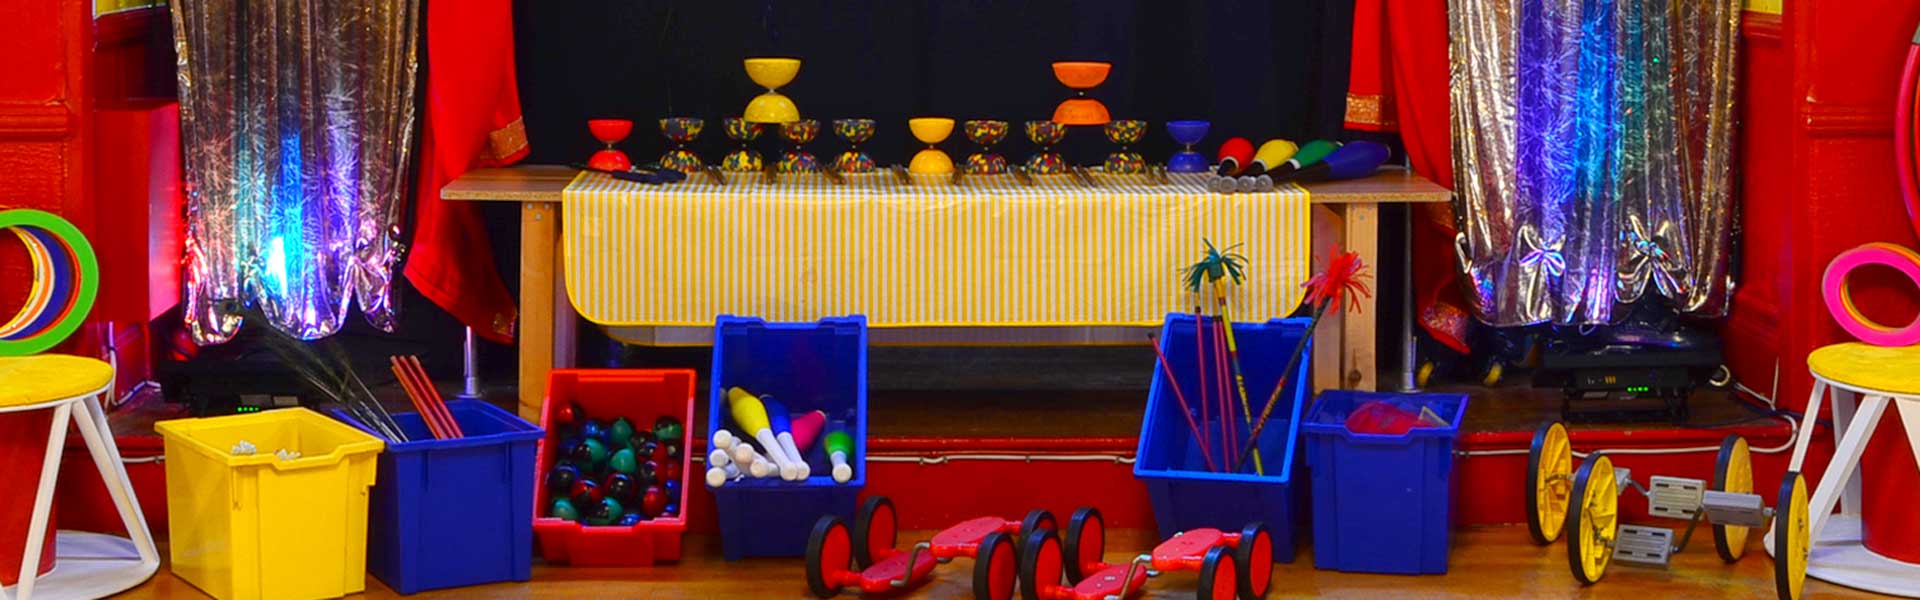 The Greates Showman circus skills props for all to take part.